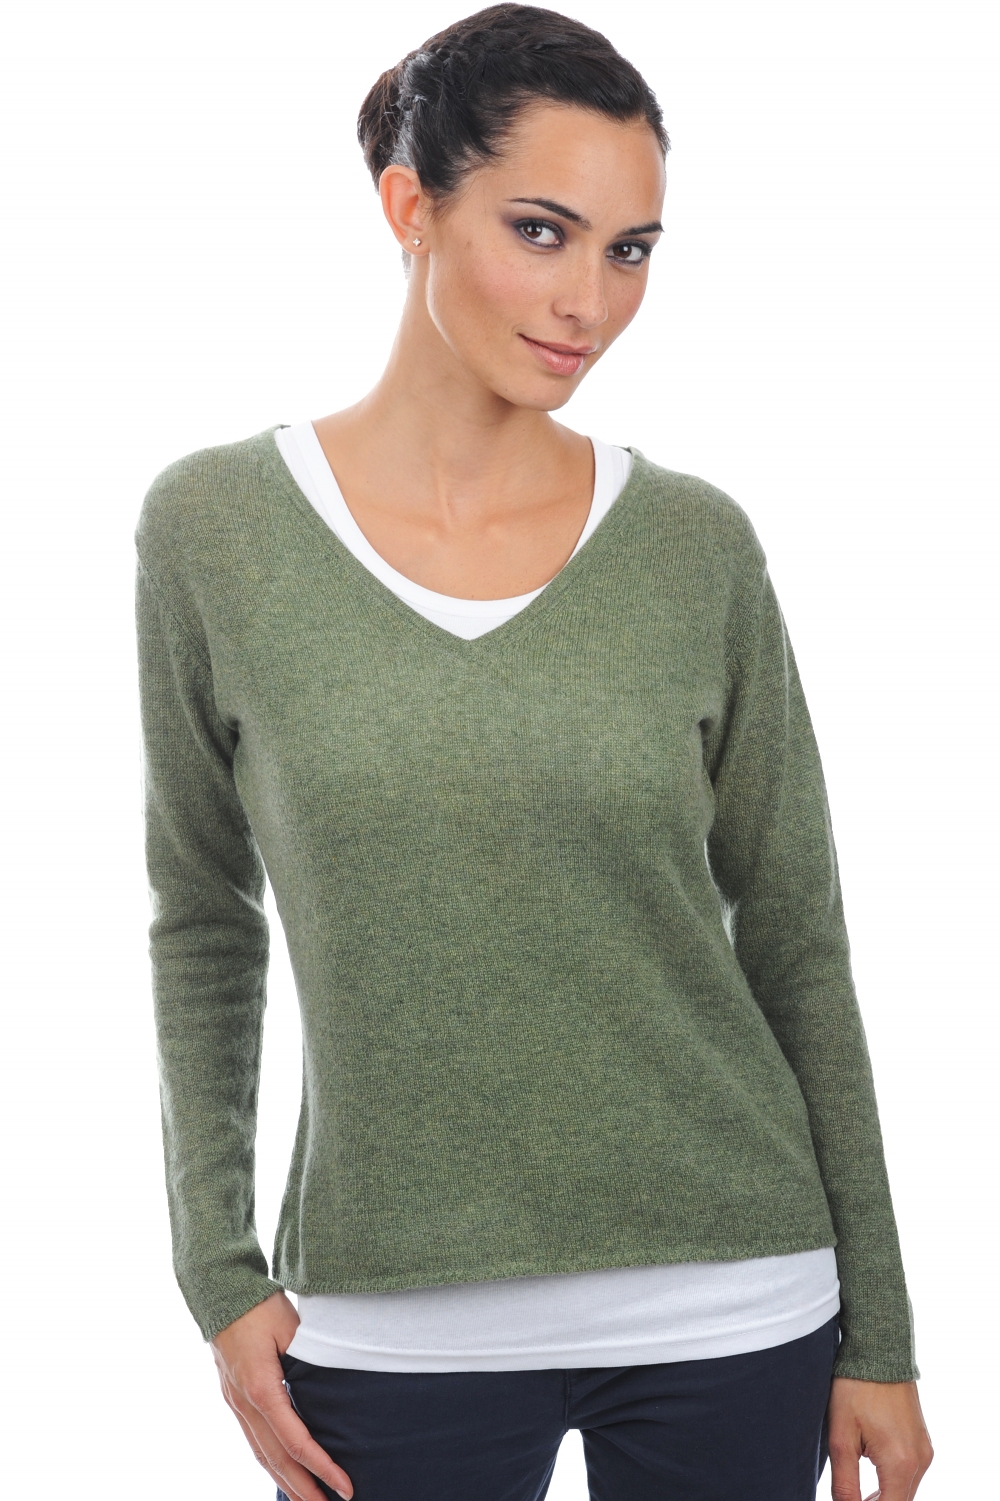 Cashmere ladies basic sweaters at low prices flavie olive chine 3xl